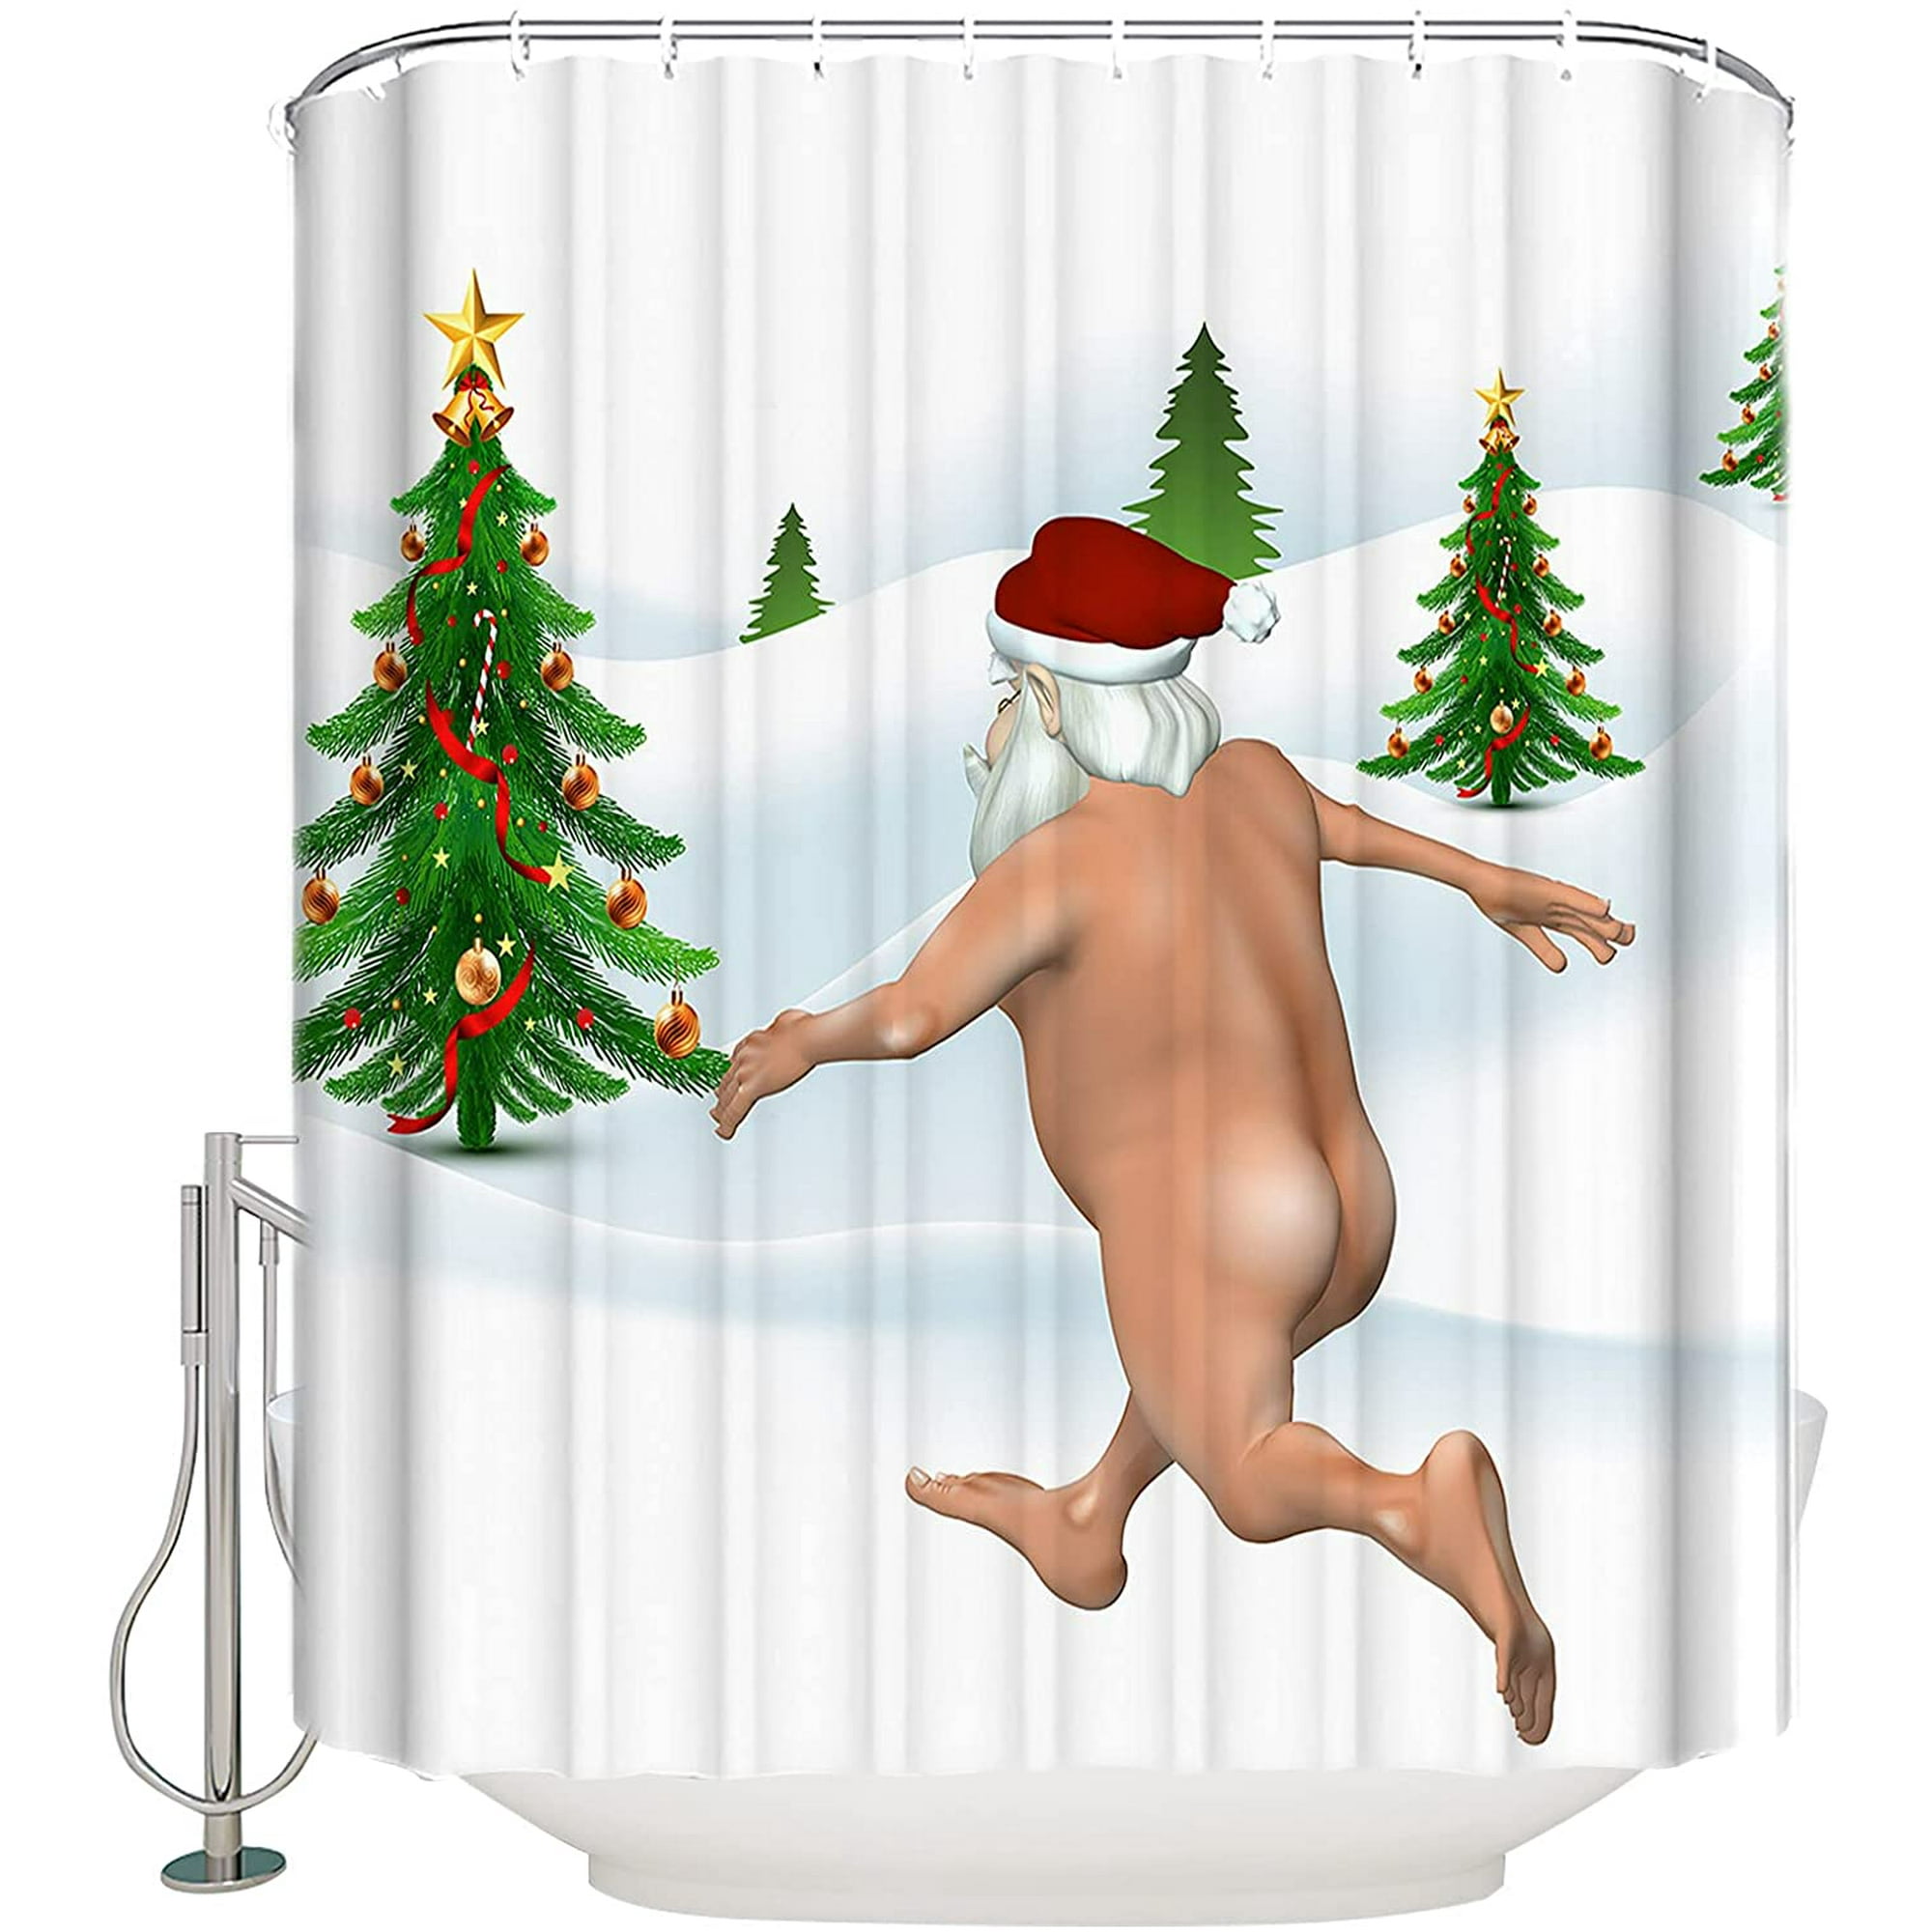 HTOOQ HTOOQ Shower Curtain, Funny Xmas Naked Santa Claus Ugly Christmas  Trees Funny Rustic Waterproof Washable Fabric Curtains with 12 Hooks for  HTOOQ 36